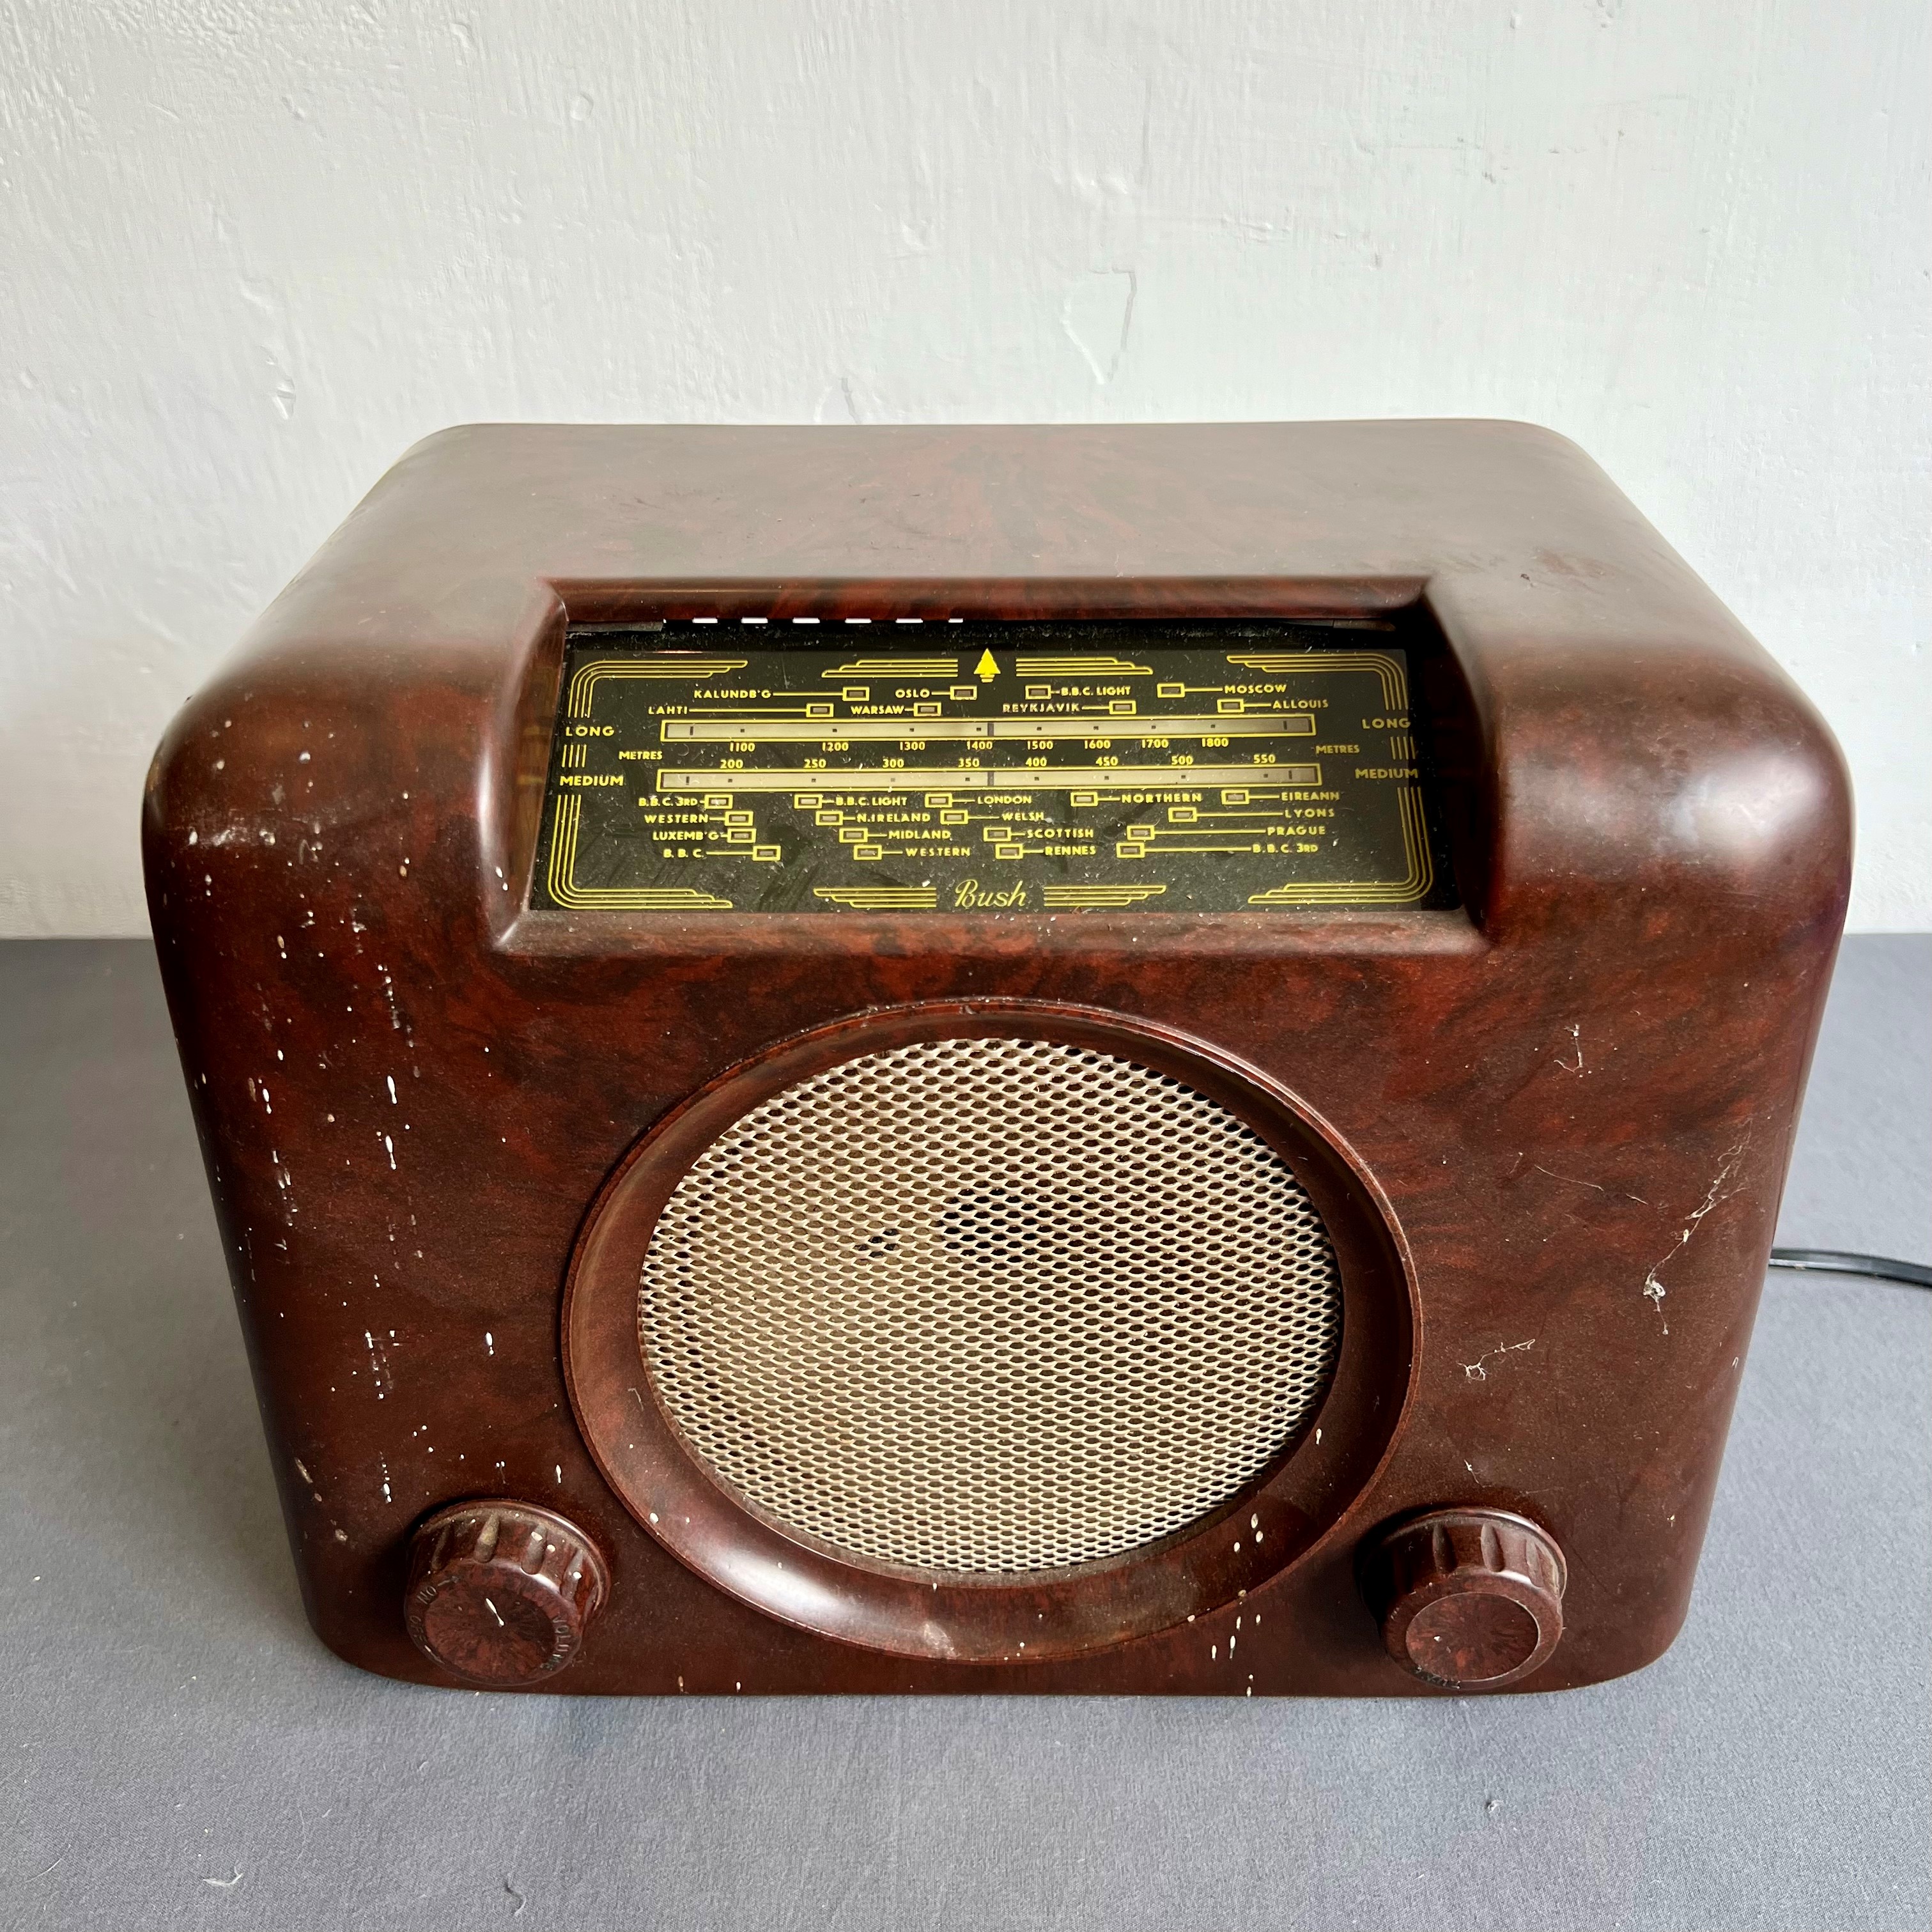 Two Bush bakelite radios - 1950s, comprising a DAC 90A and a DAC 10, both with brown bakelite cases, - Image 6 of 8